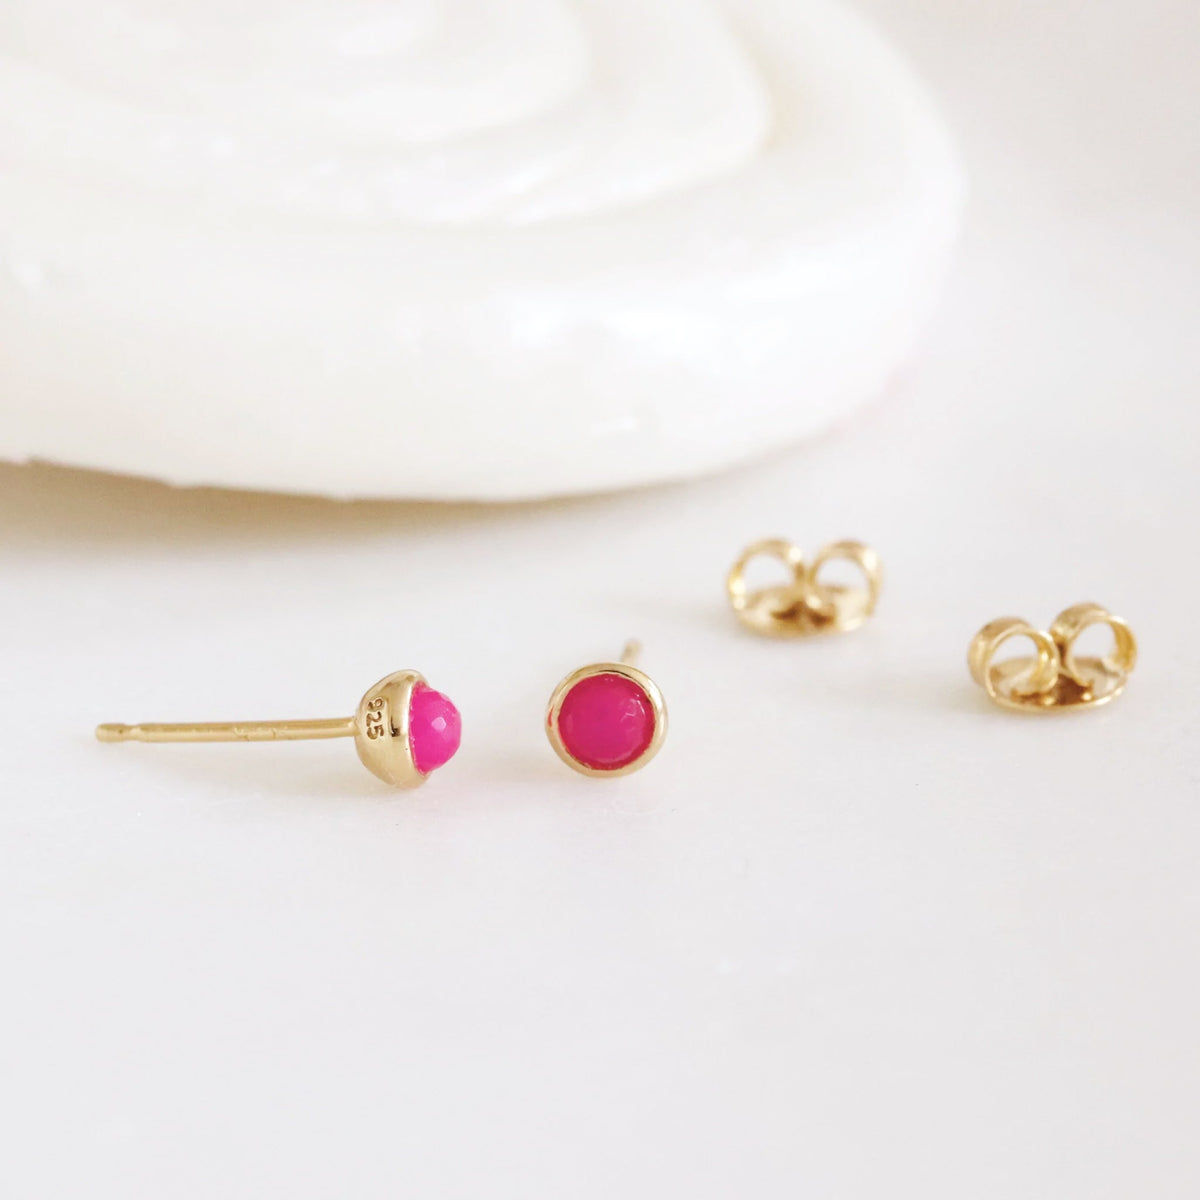 TINY PROTECT STUD EARRINGS - HOT PINK CHALCEDONY &amp; GOLD - SO PRETTY CARA COTTER